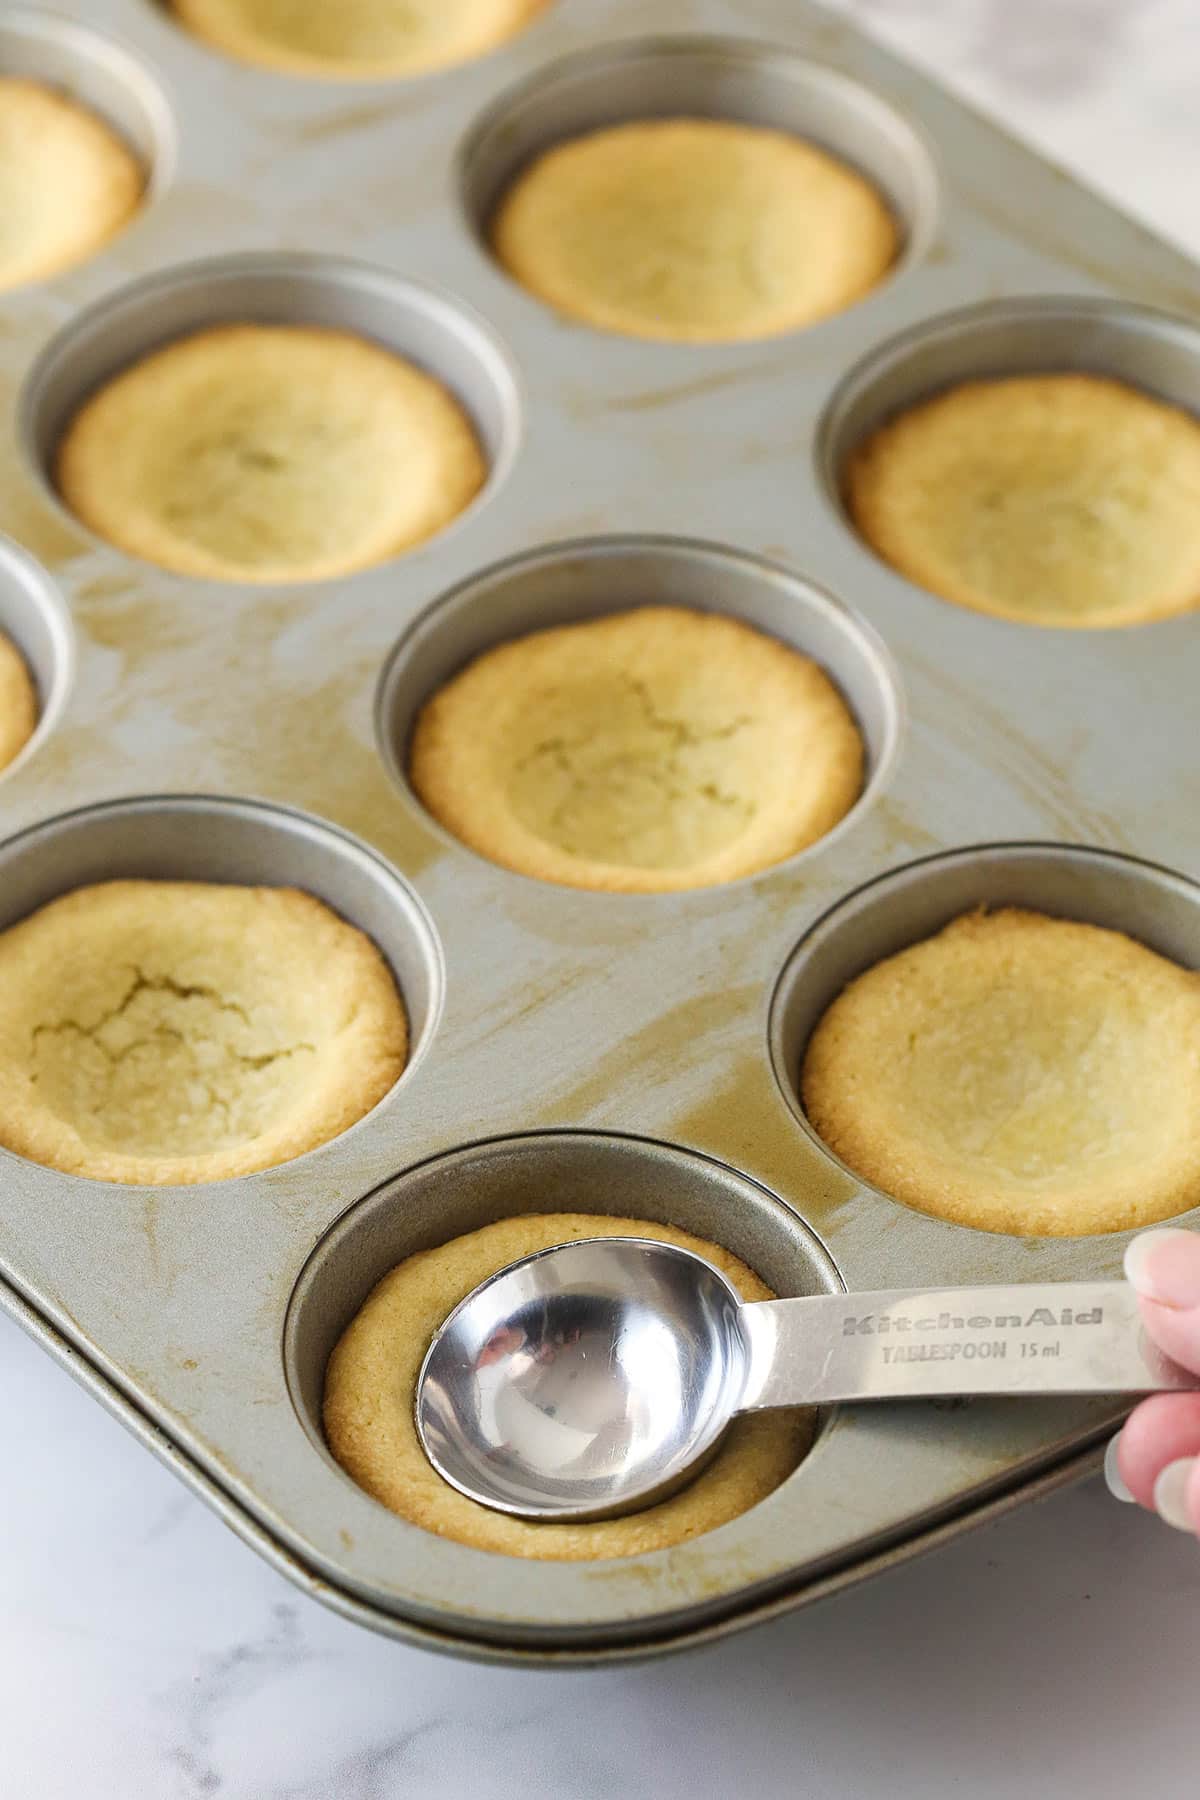 Using a tablespoon to make a divot in sugar cookies baked in cupcake tins.